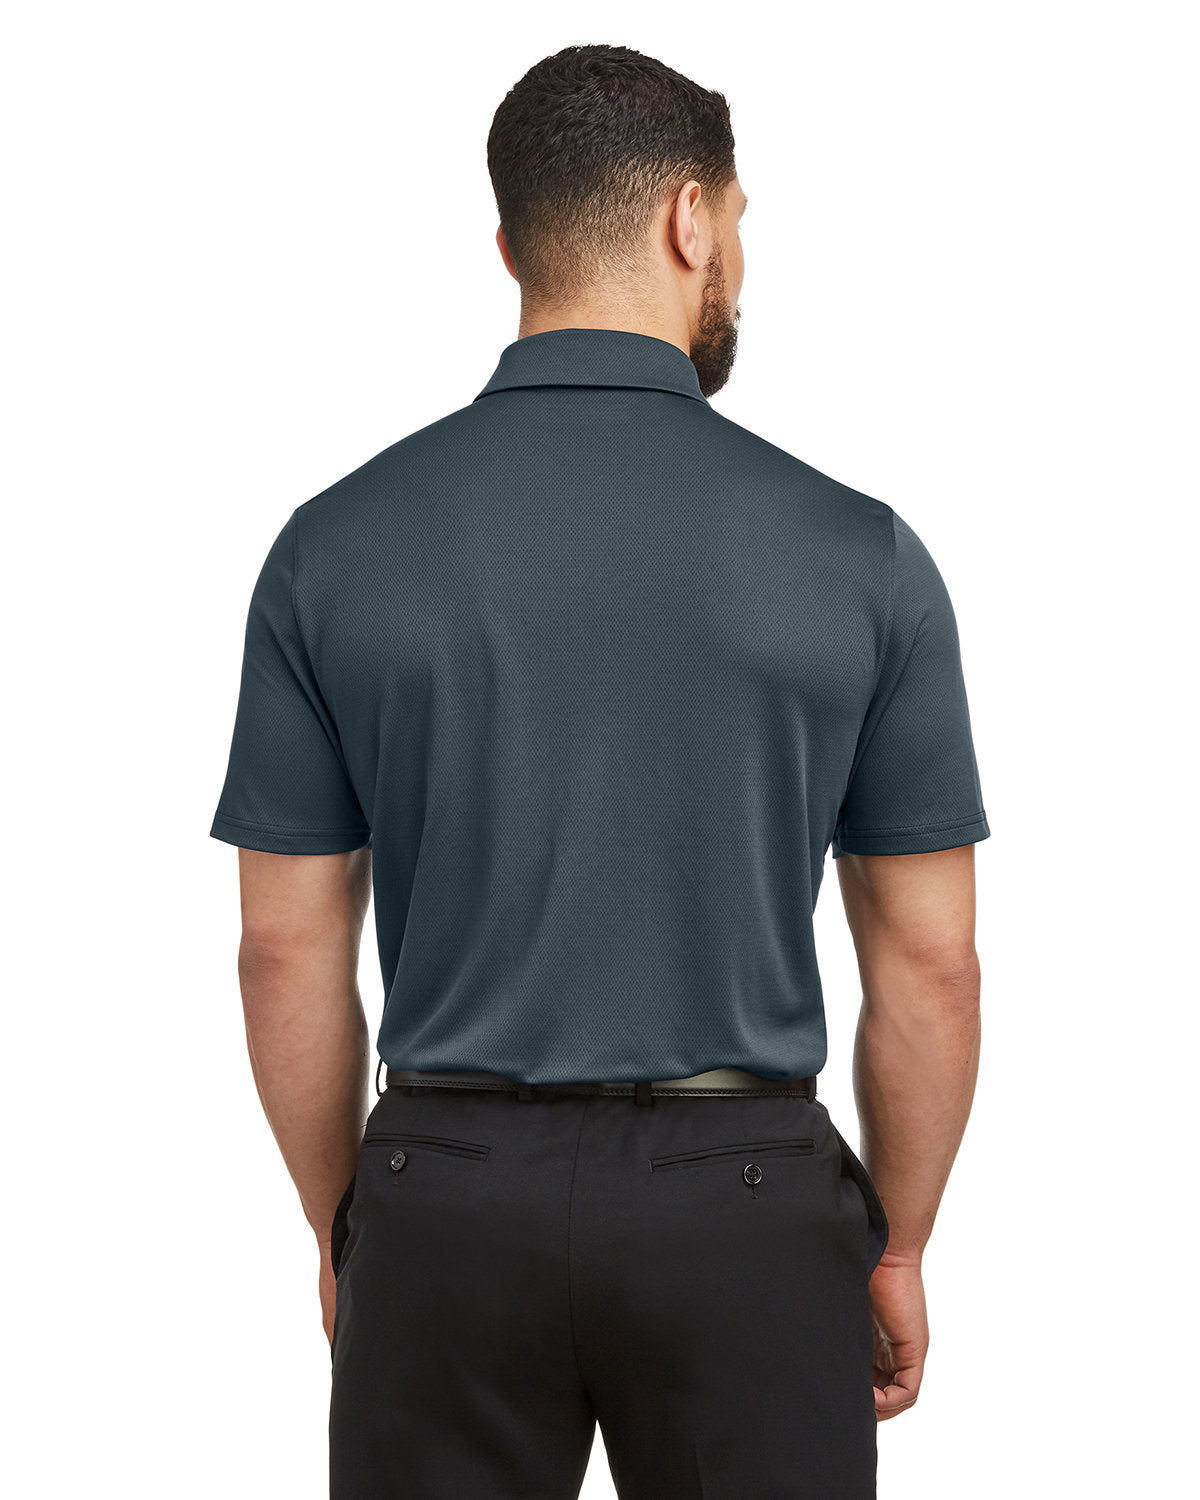 Under Armour Men's Tech Branded Polos, Stealth Grey